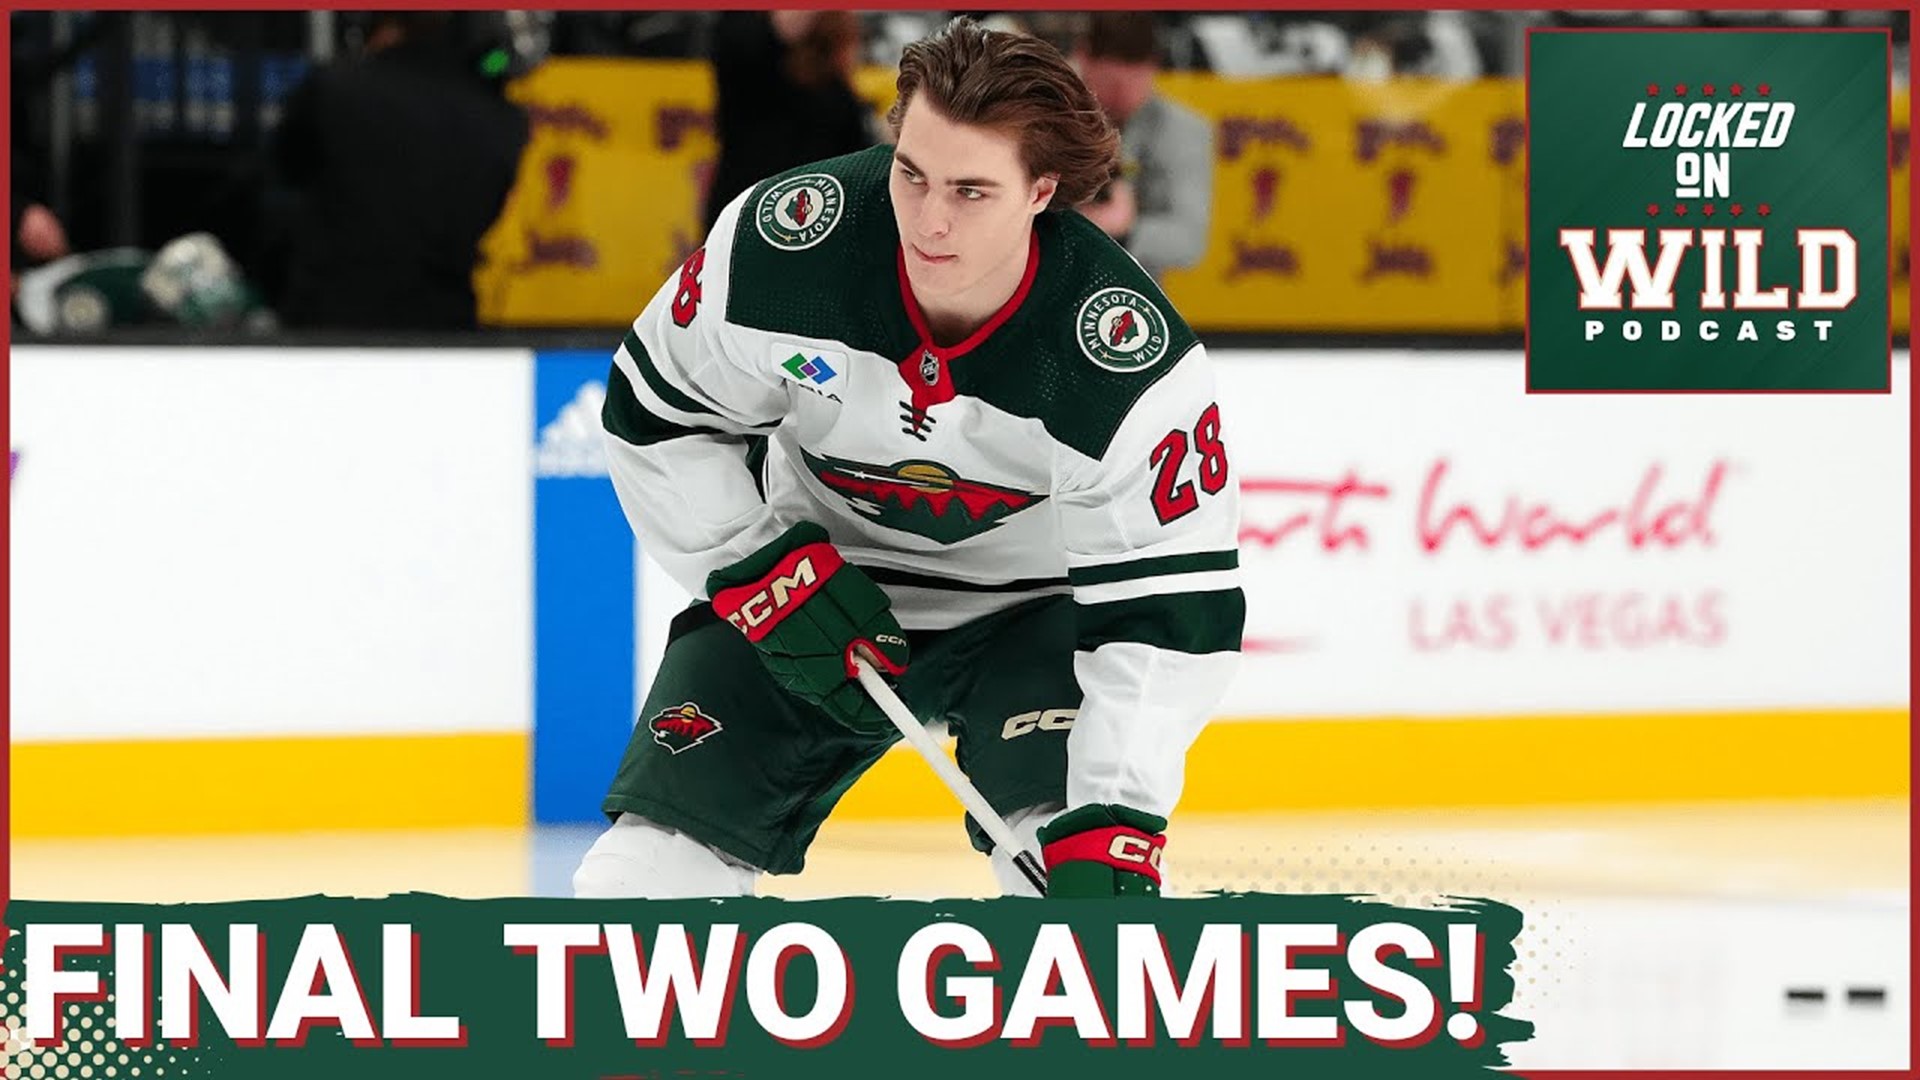 Youth Movement Holding their own Down the Stretch for the Wild!